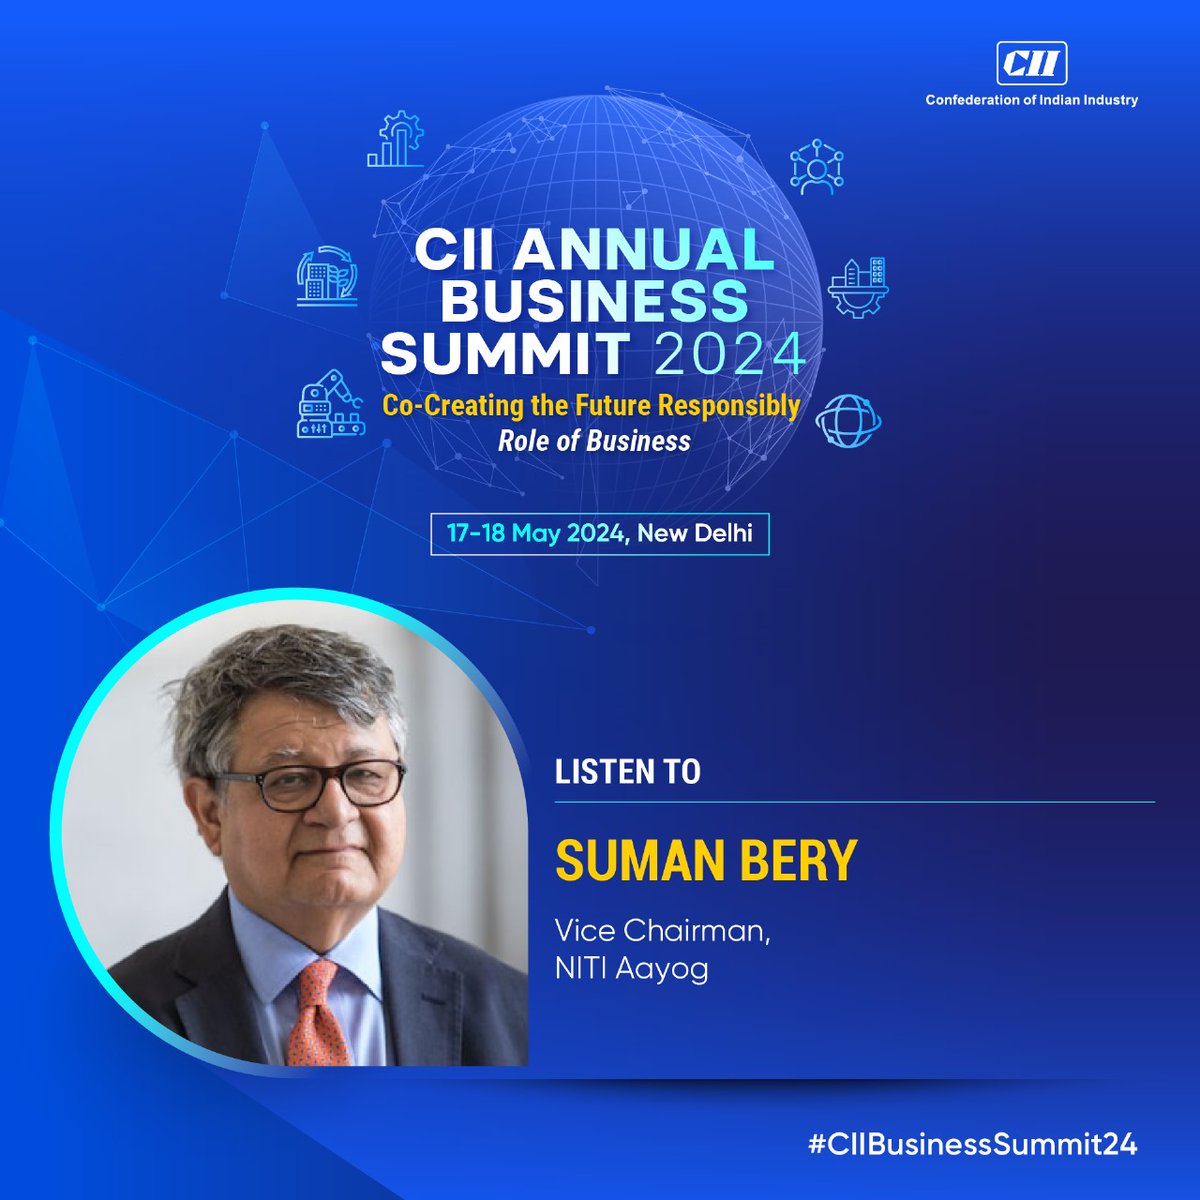 Listen to @suman_bery, Vice Chairman,@NITIAayog share deep insights at the CII Annual Business Summit 2024. Join for thought provoking discussions on the way ahead for India and its progress on competitiveness, inclusiveness, innovation, globalisation and sustainability.